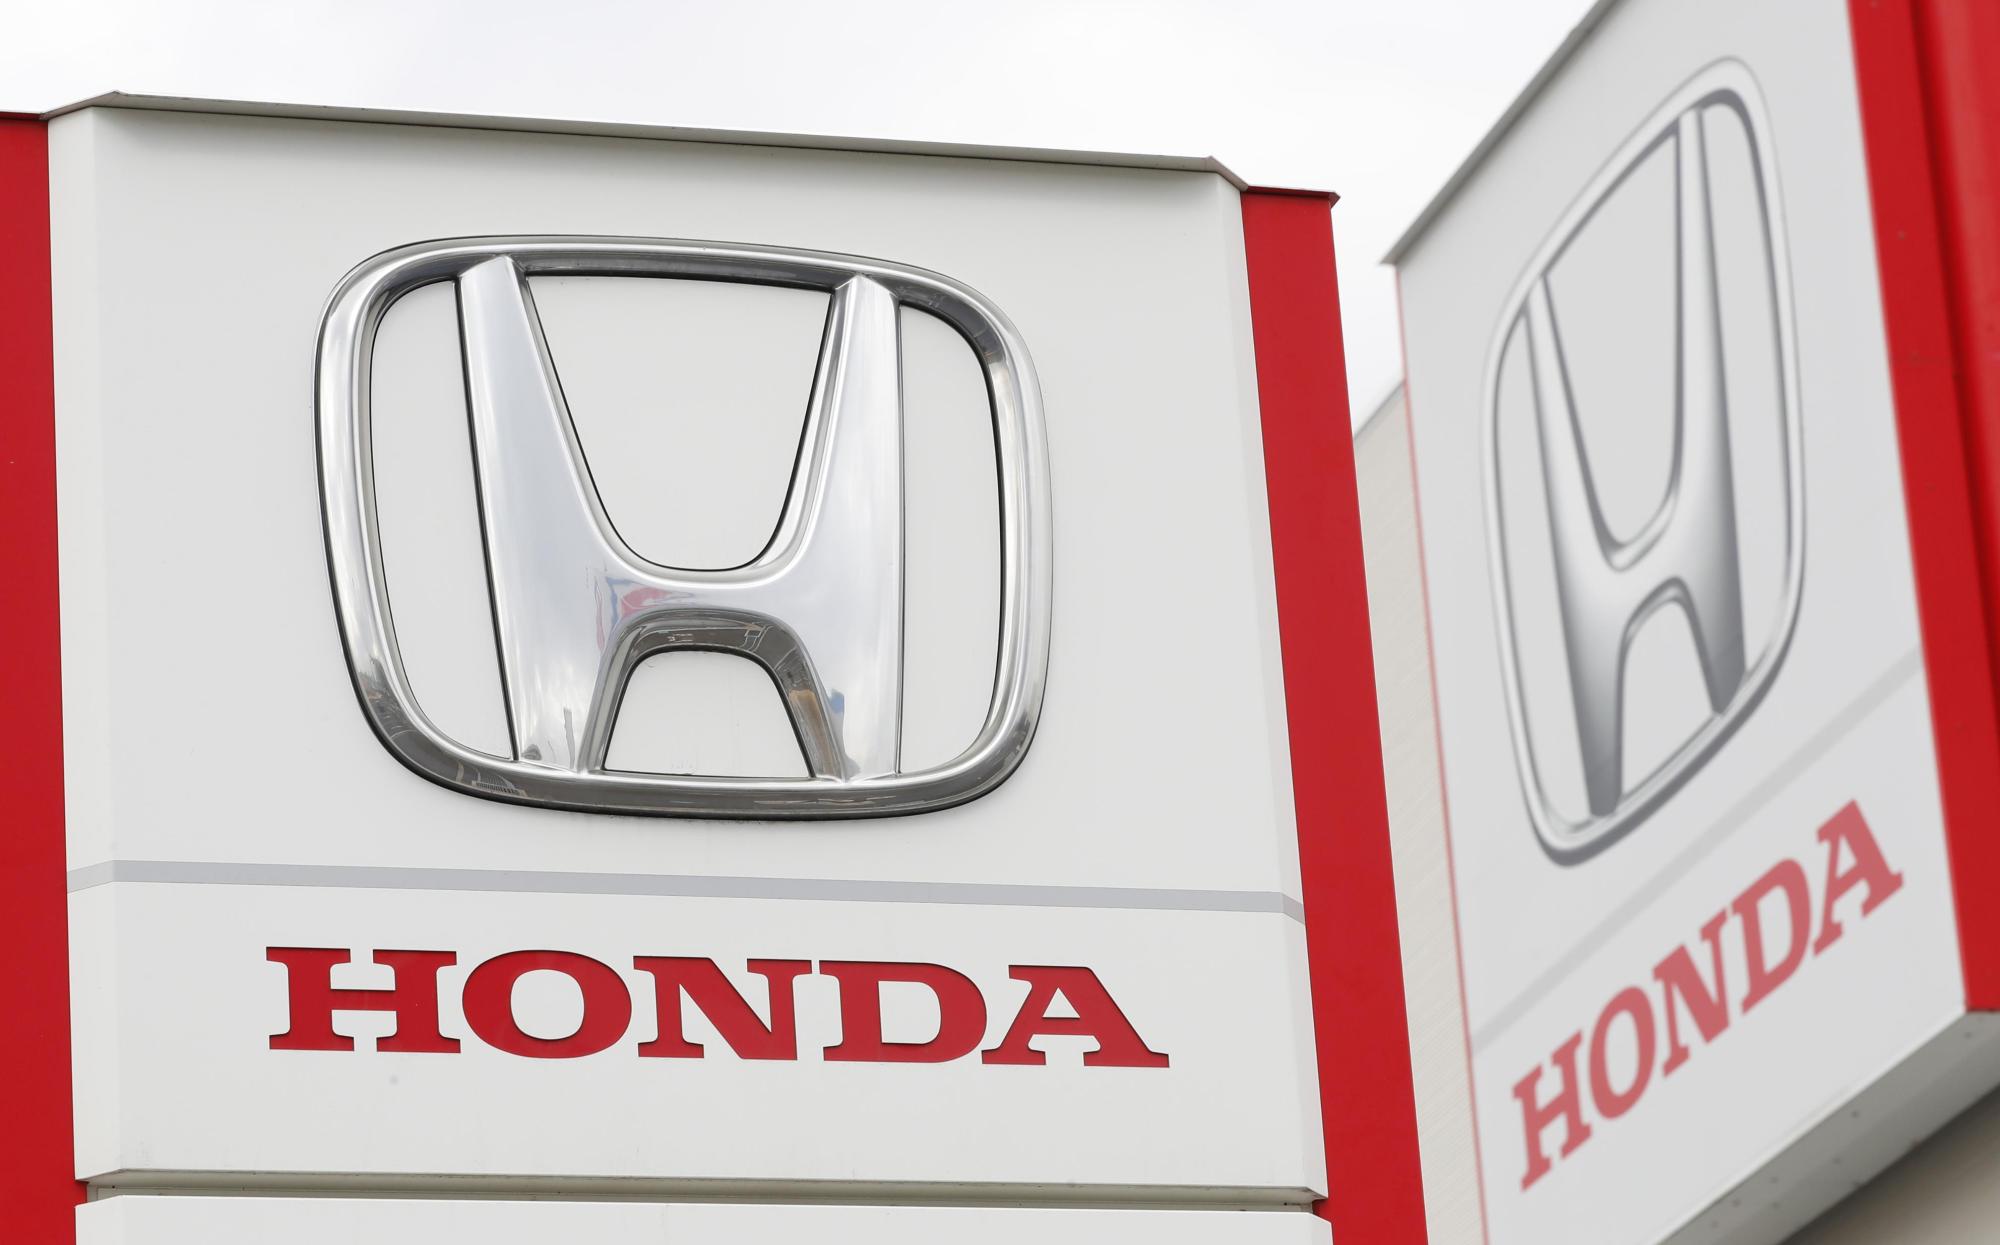 Honda Motor Co. may become Japan's first automaker to launch a vehicle with Level 3 autonomous driving technology this year, sources say. | KYODO